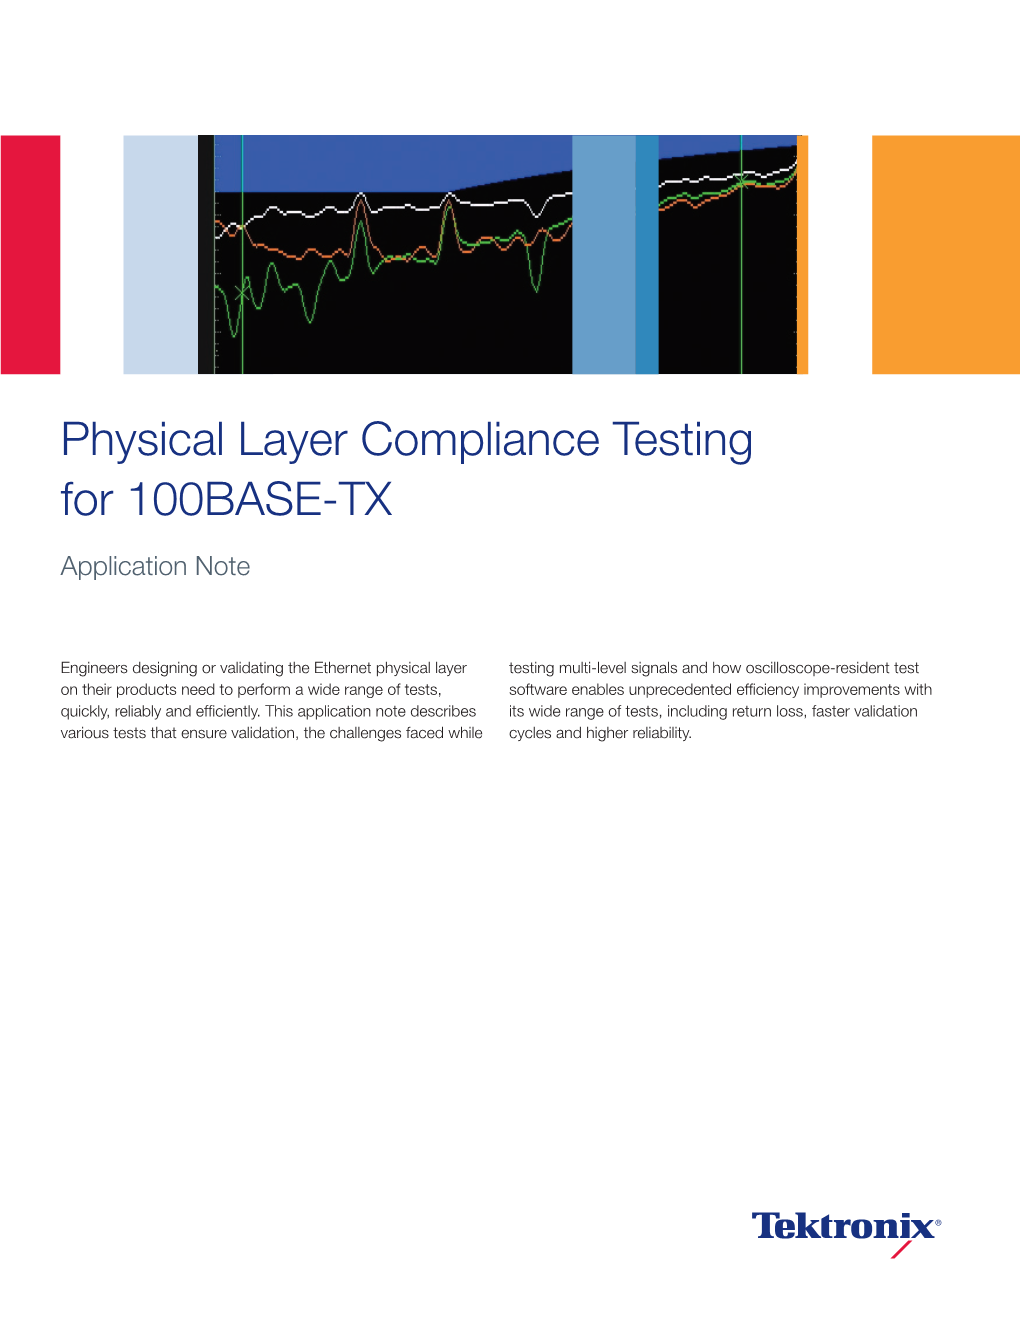 Physical Layer Compliance Testing for 100BASE-TX